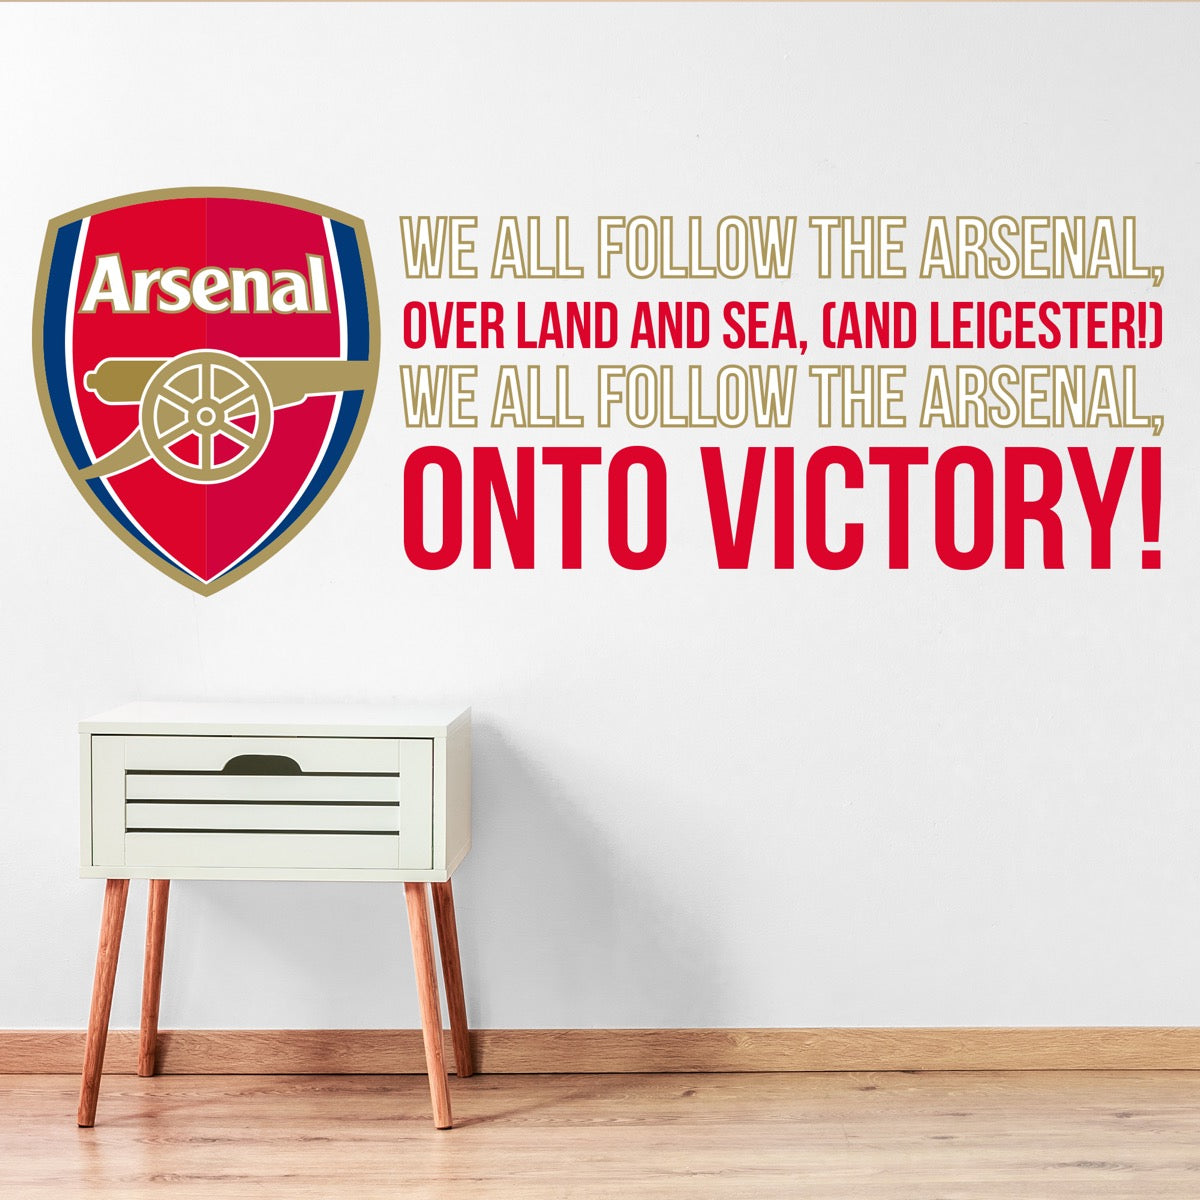 arsenal-crest-and-song.jpg